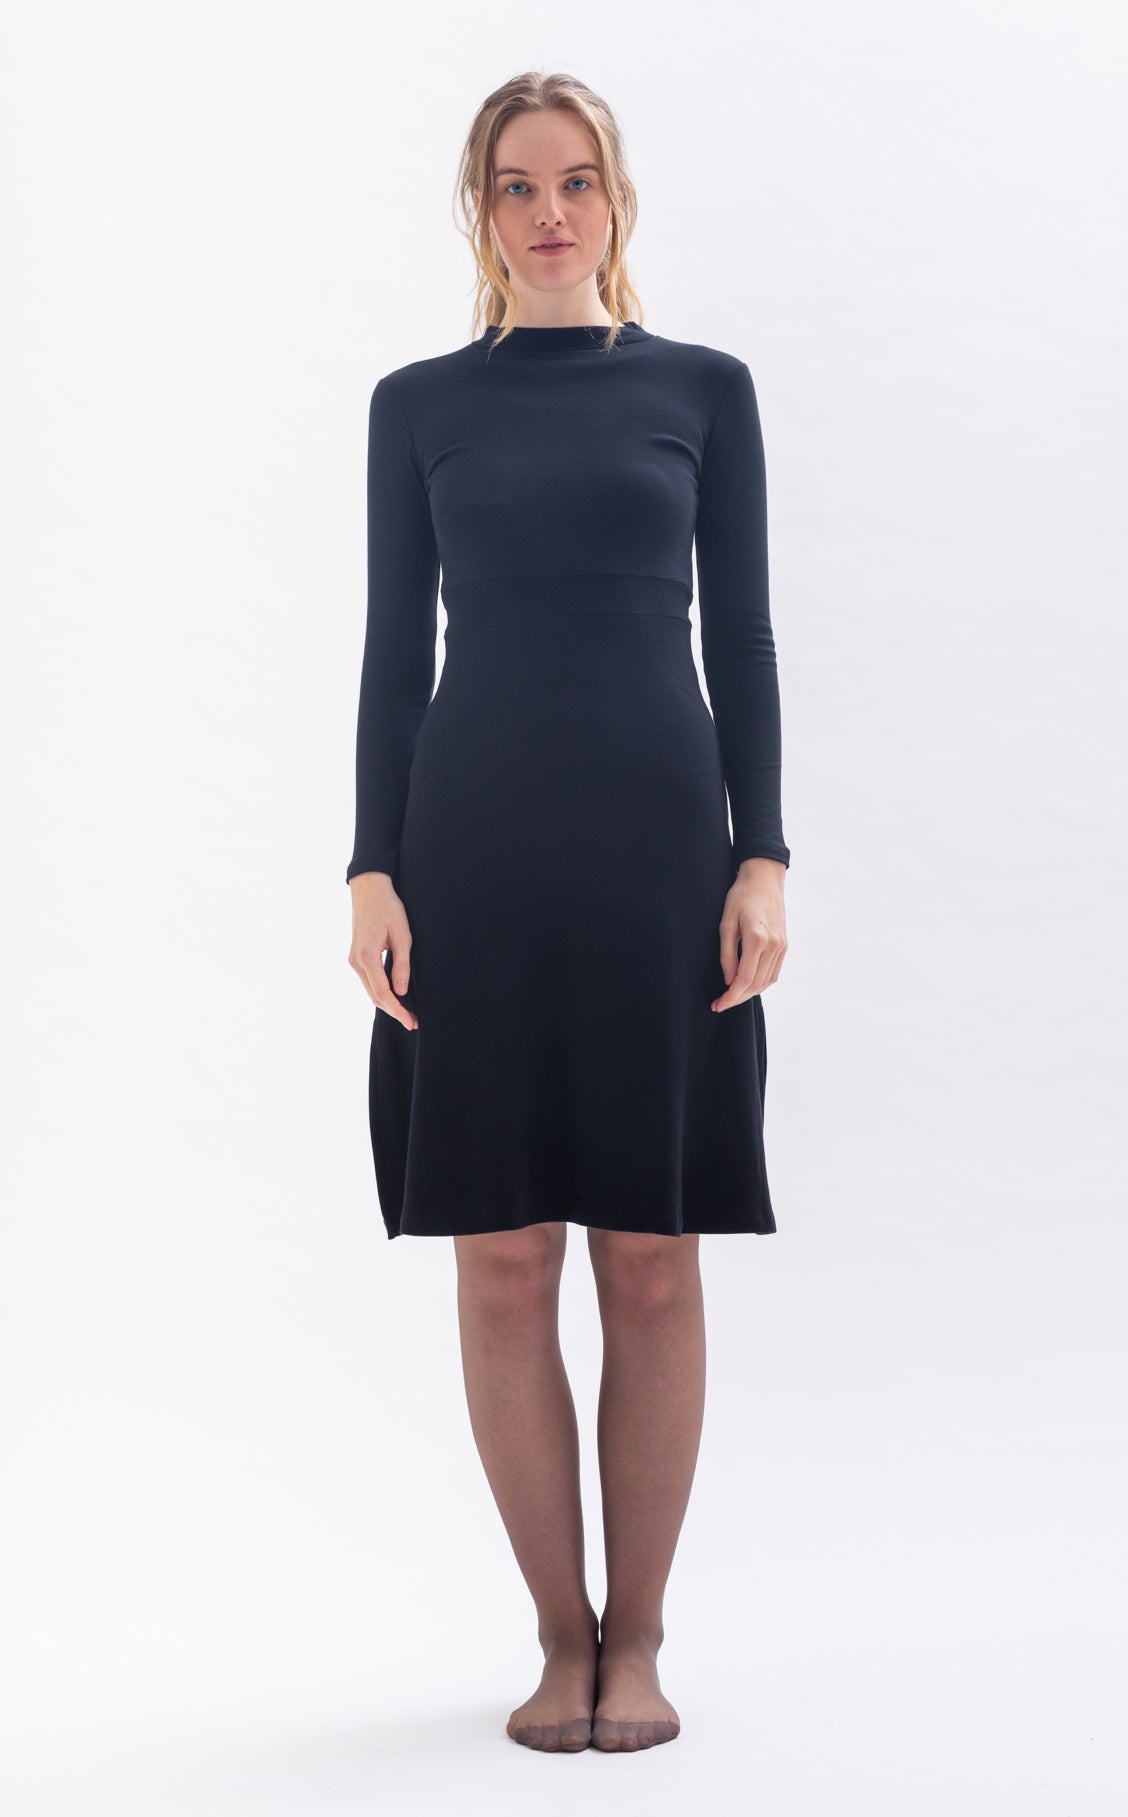 Knee-length dress "JUU-DY" in black made from 100% organic cotton